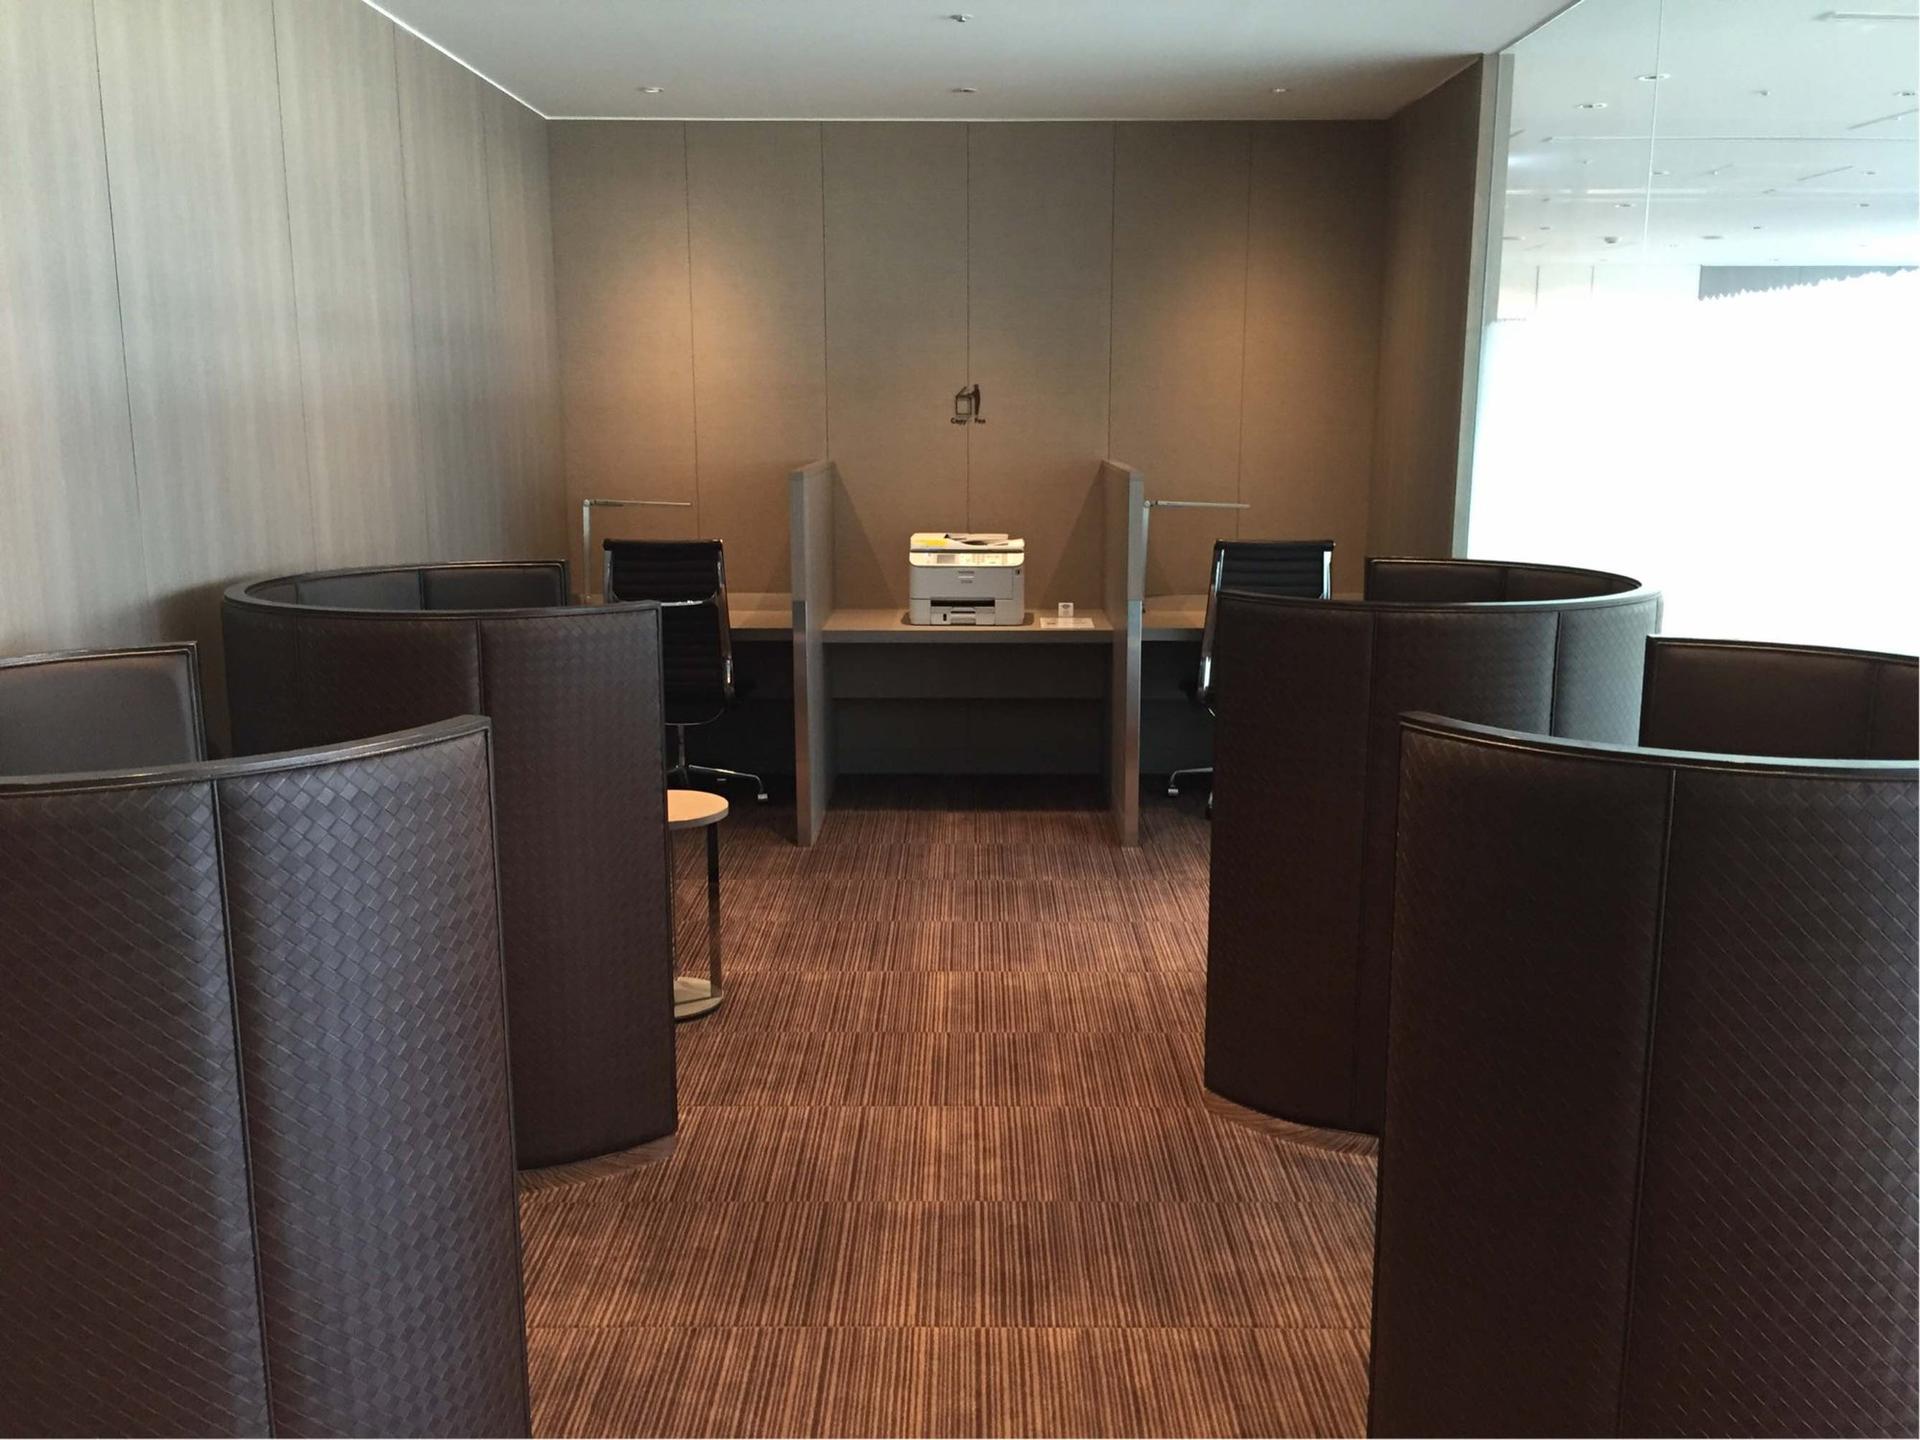 Japan Airlines JAL First Class Lounge image 24 of 43